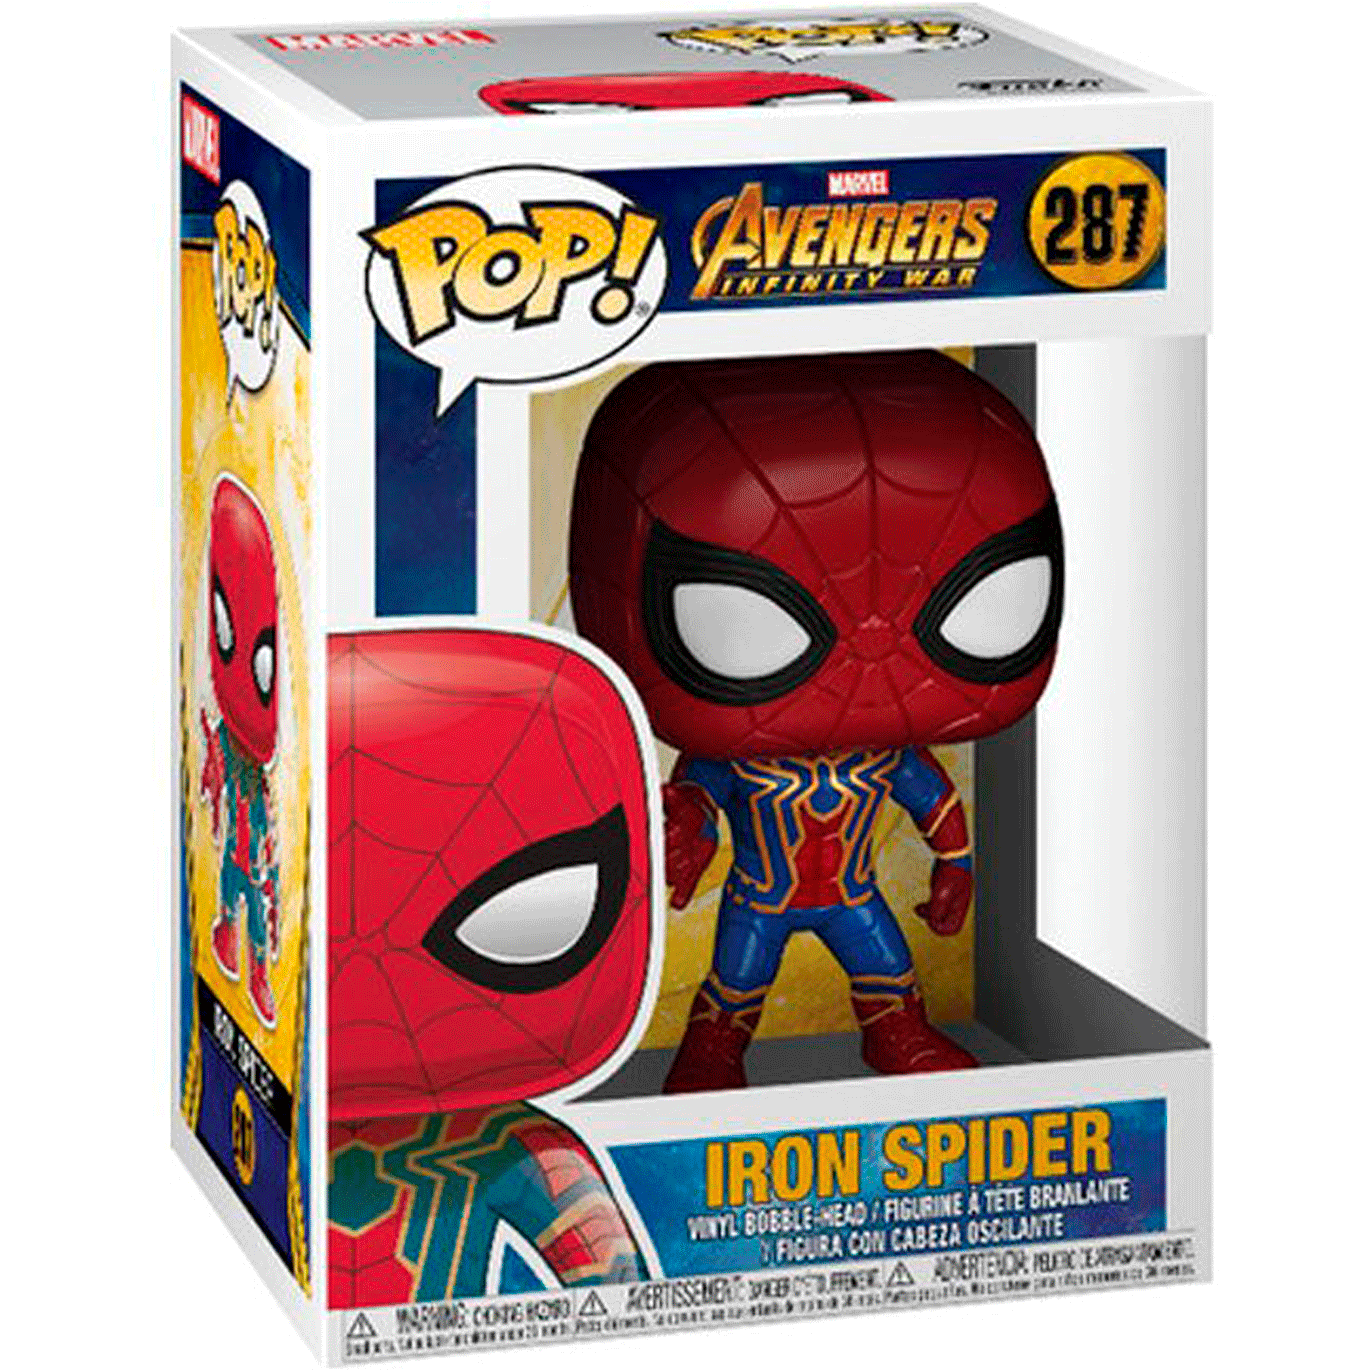 Funko Pop! Avengers Infinity War - Iron Spider - BumbleToys - 18+, 4+ Years, 5-7 Years, Action Figures, Avengers, Boys, Characters, Funko, Iron man, Pre-Order